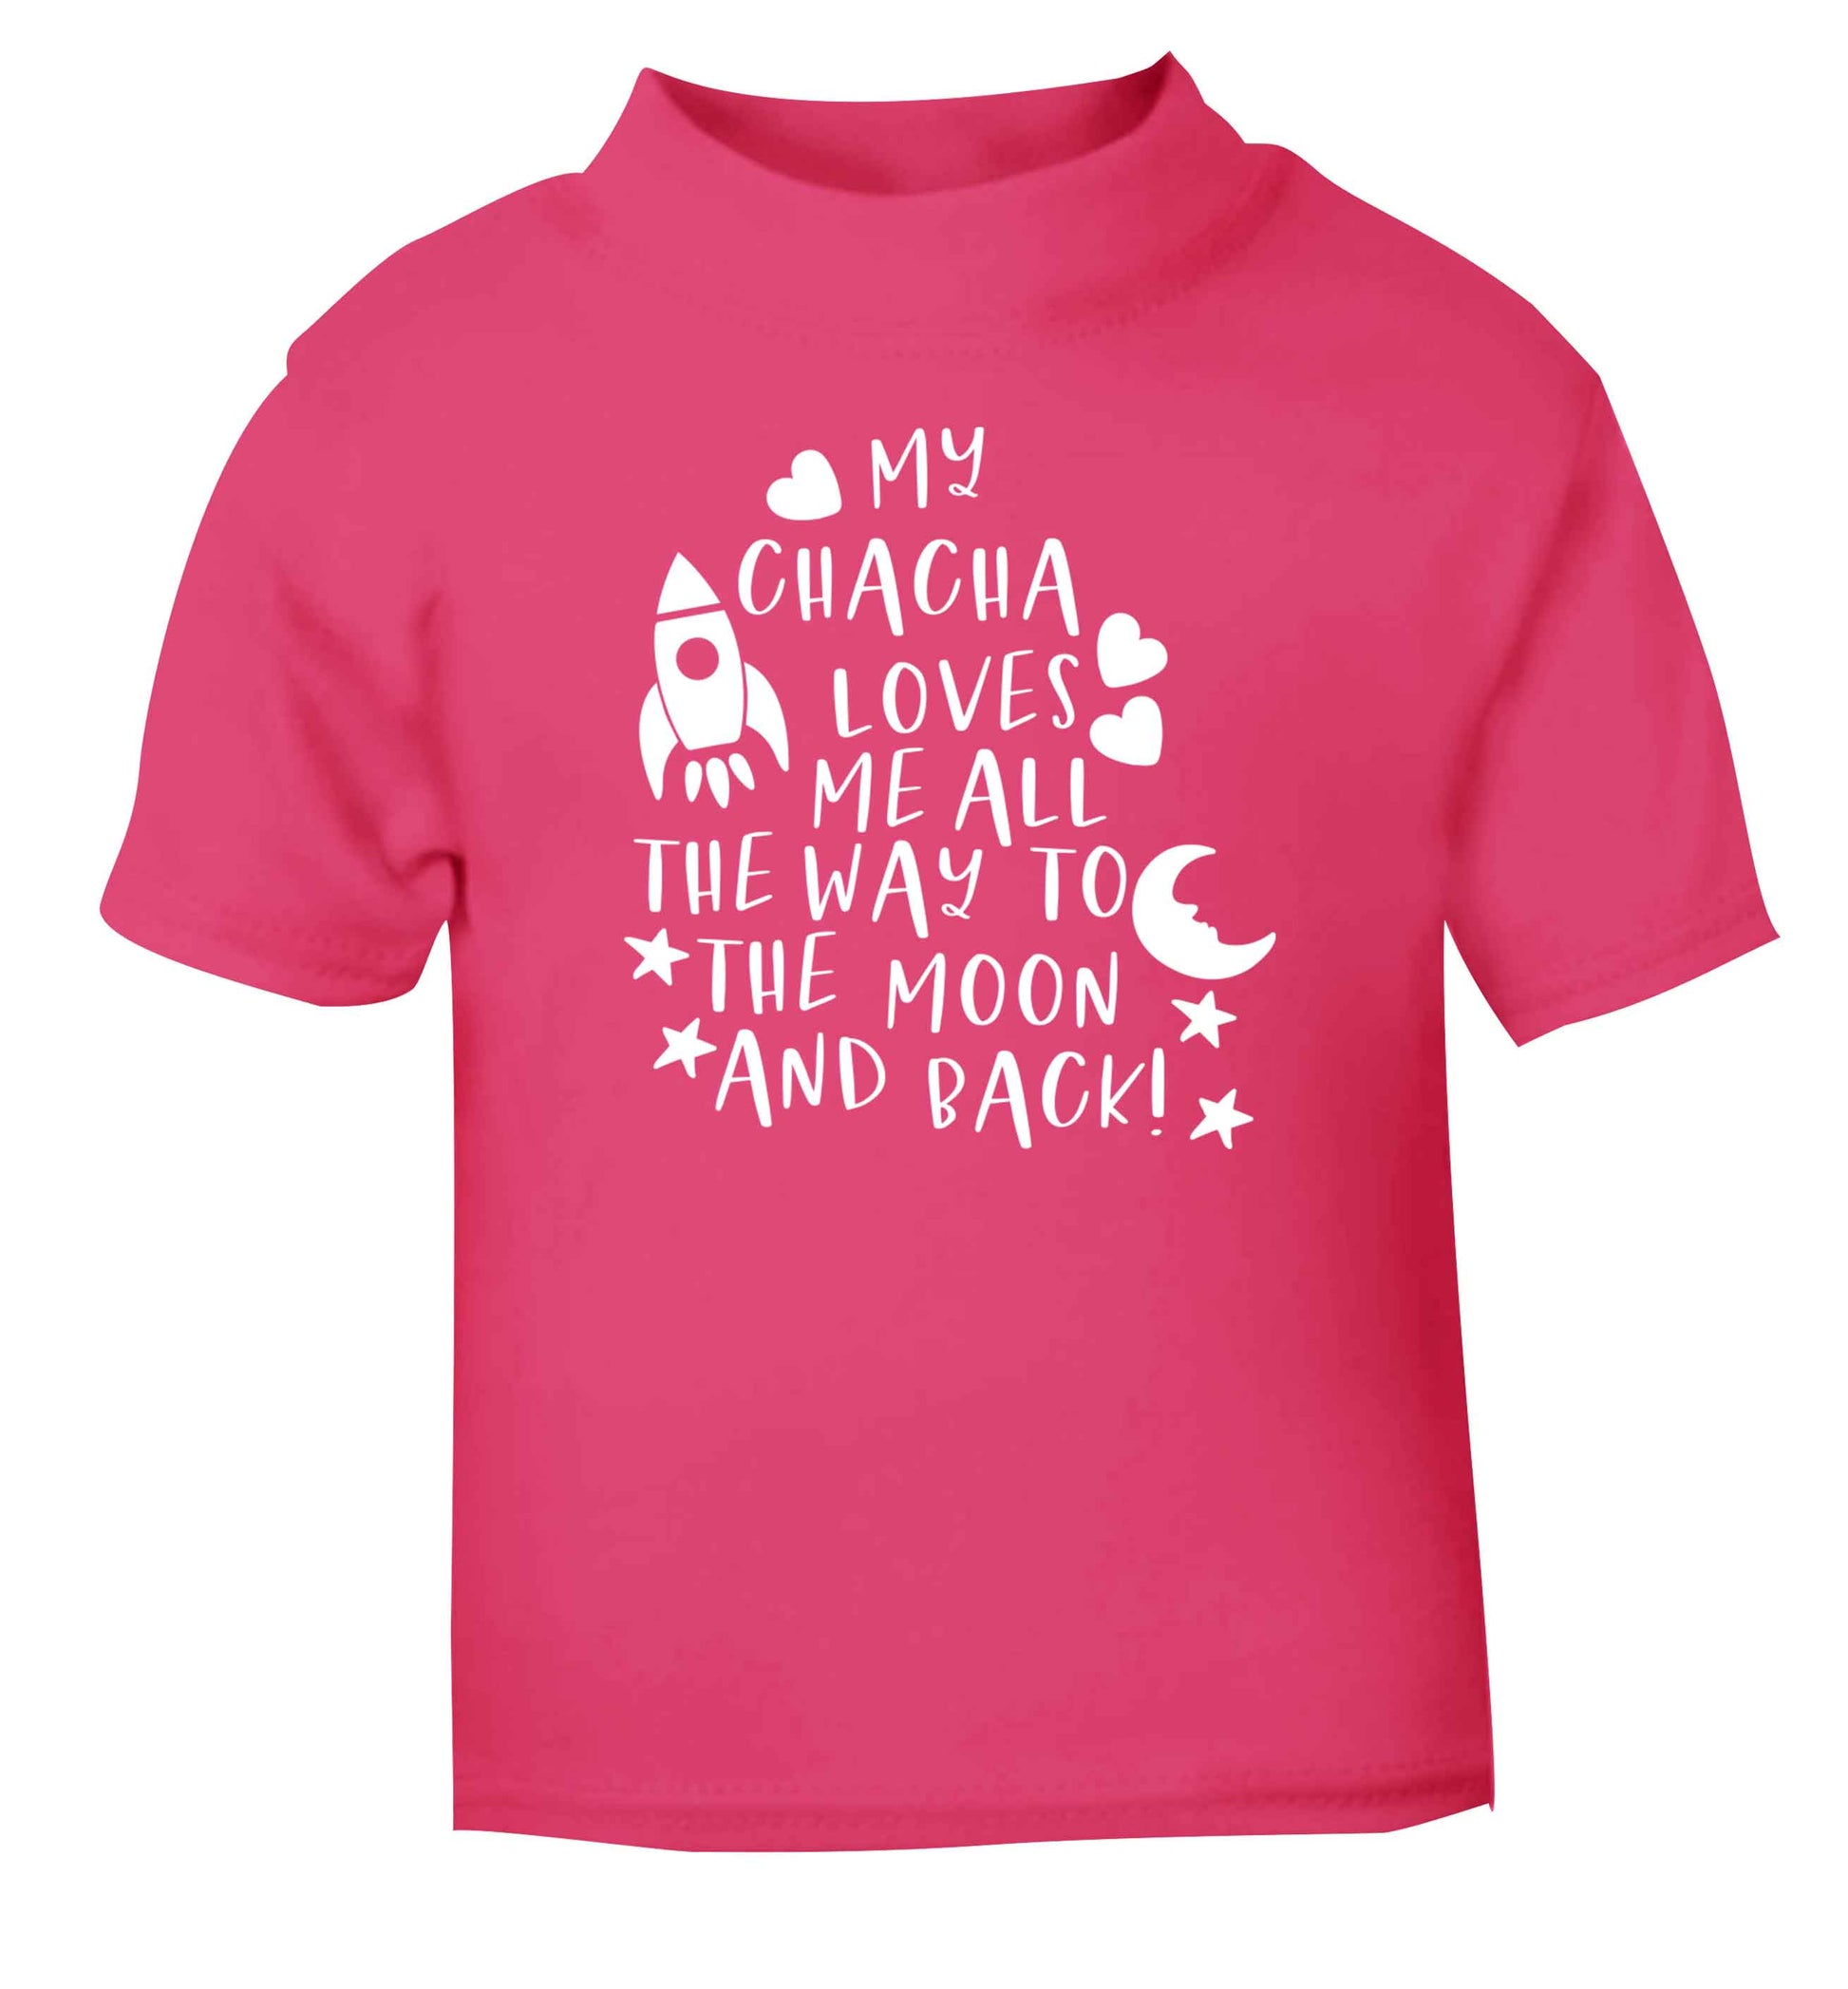 My chacha loves me all the way to the moon and back pink Baby Toddler Tshirt 2 Years